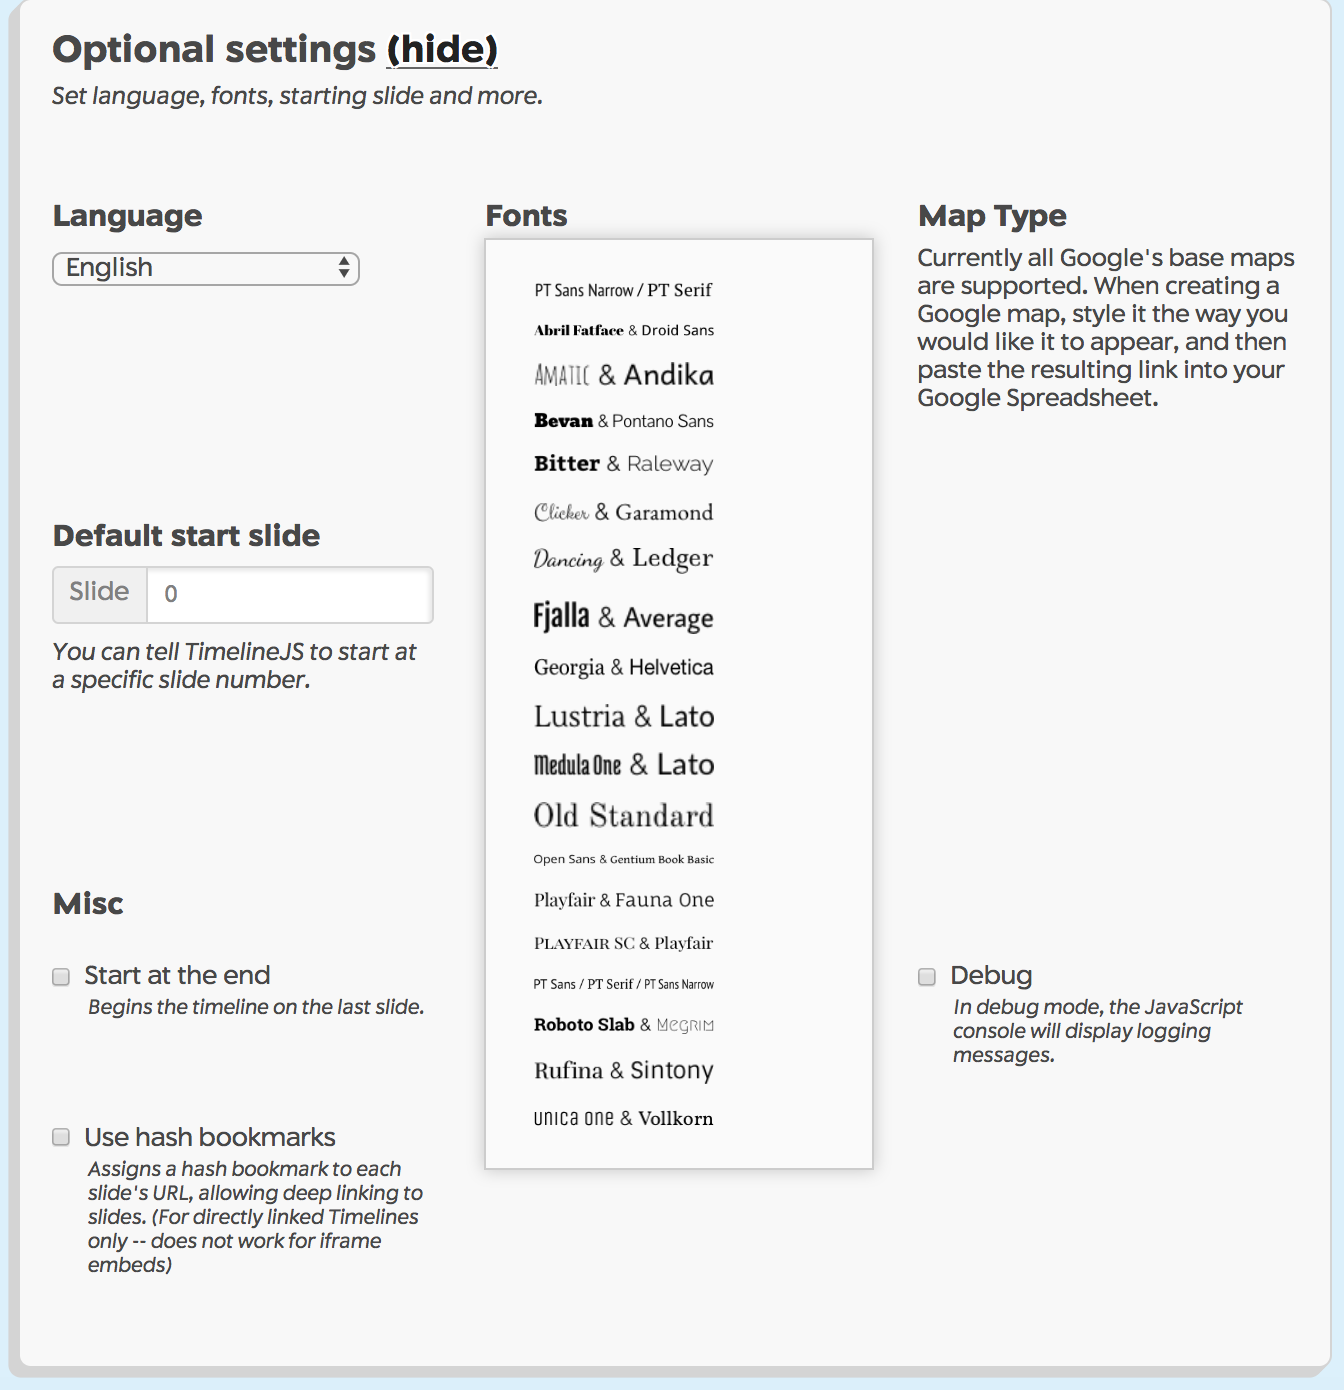 Image of optional settings section of timelineJS